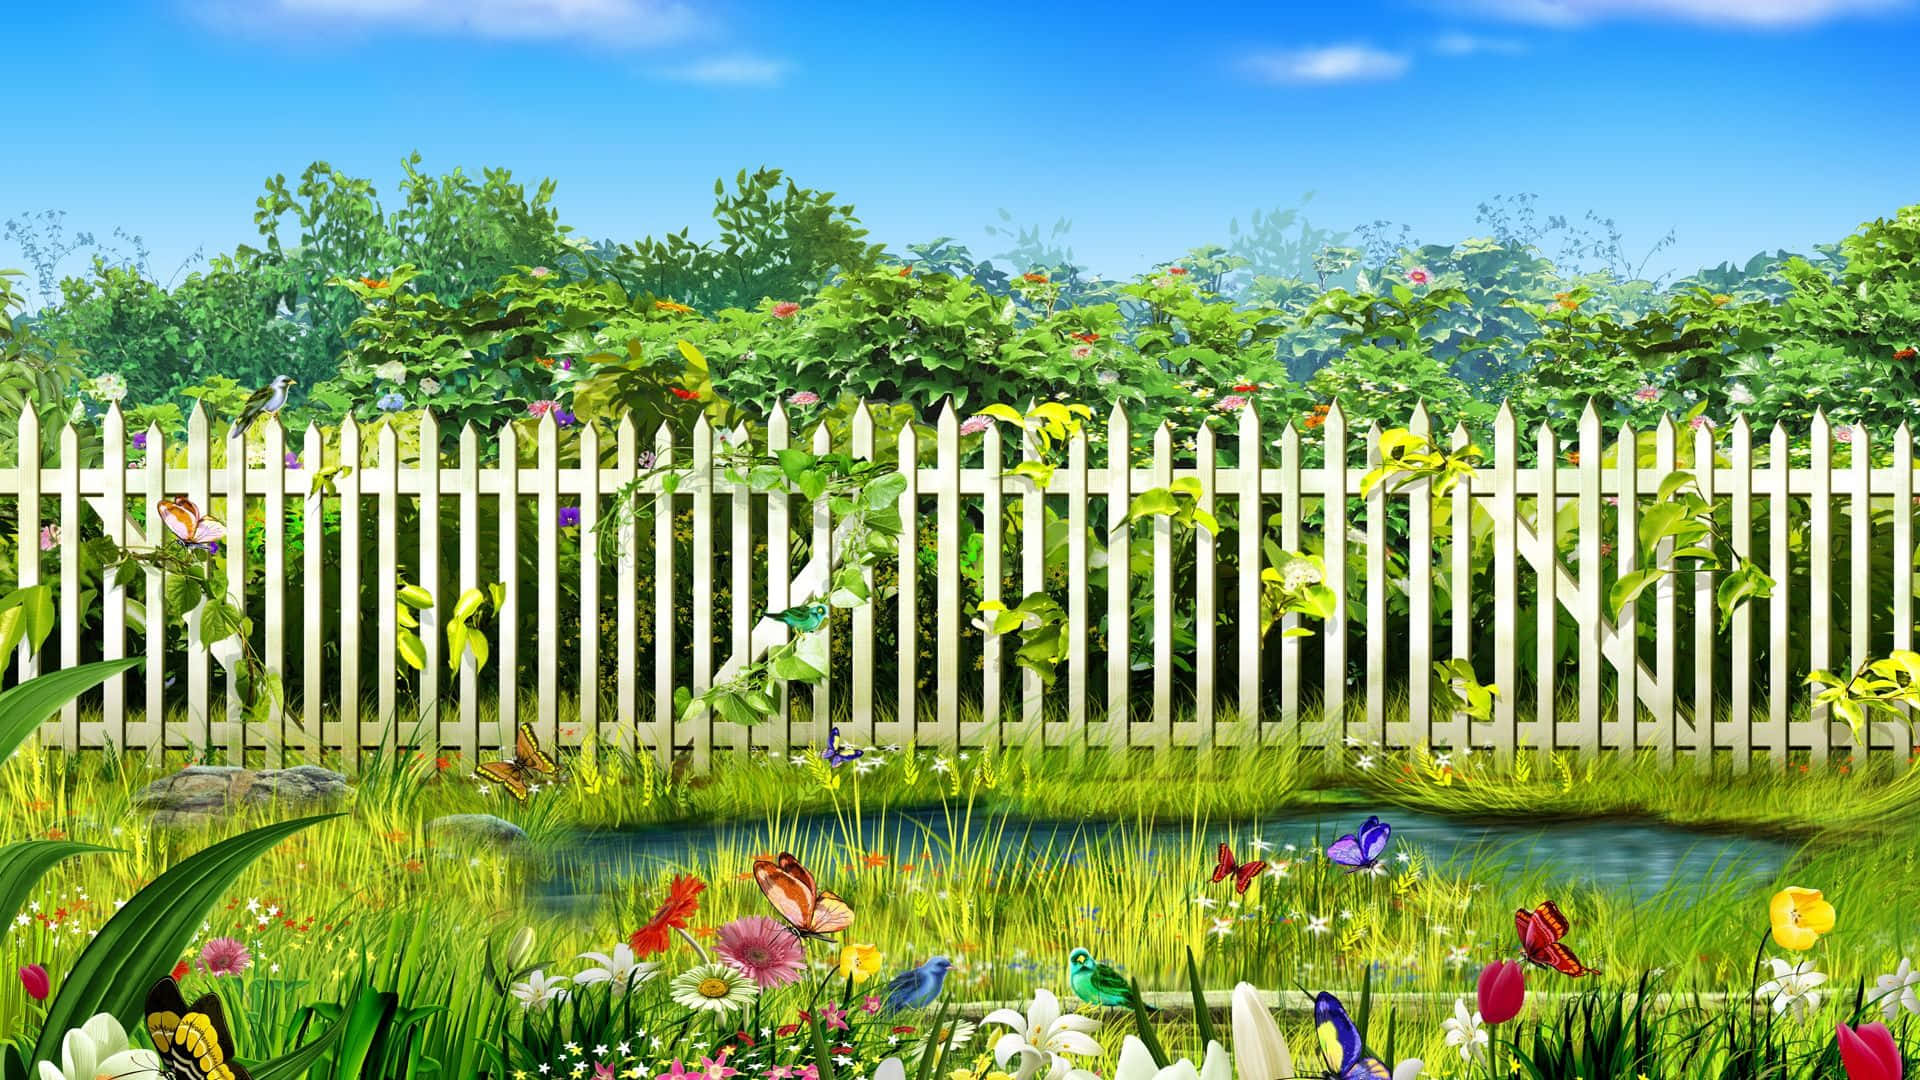 Blooming Spring Garden with Colorful Flowers Wallpaper